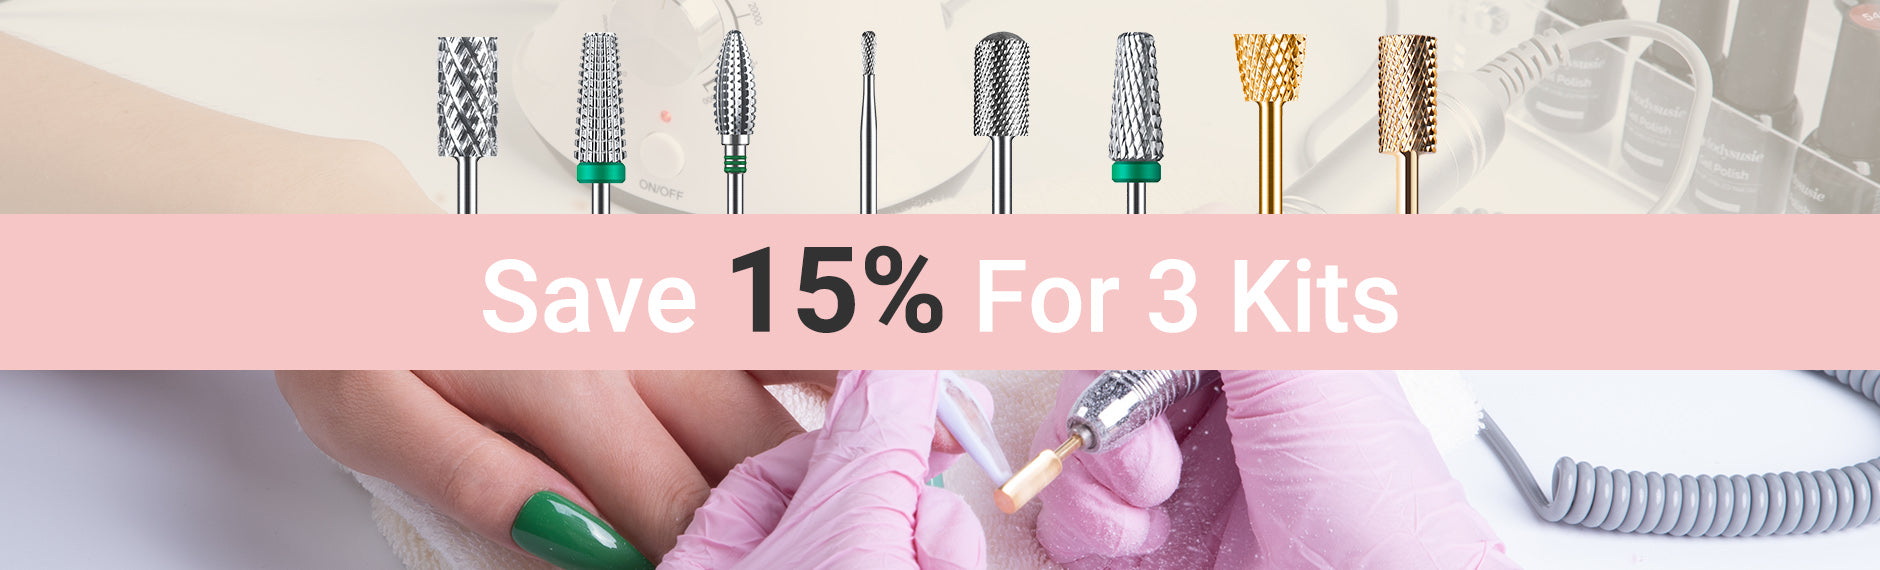 ❀ Buy 3 for 15% OFF